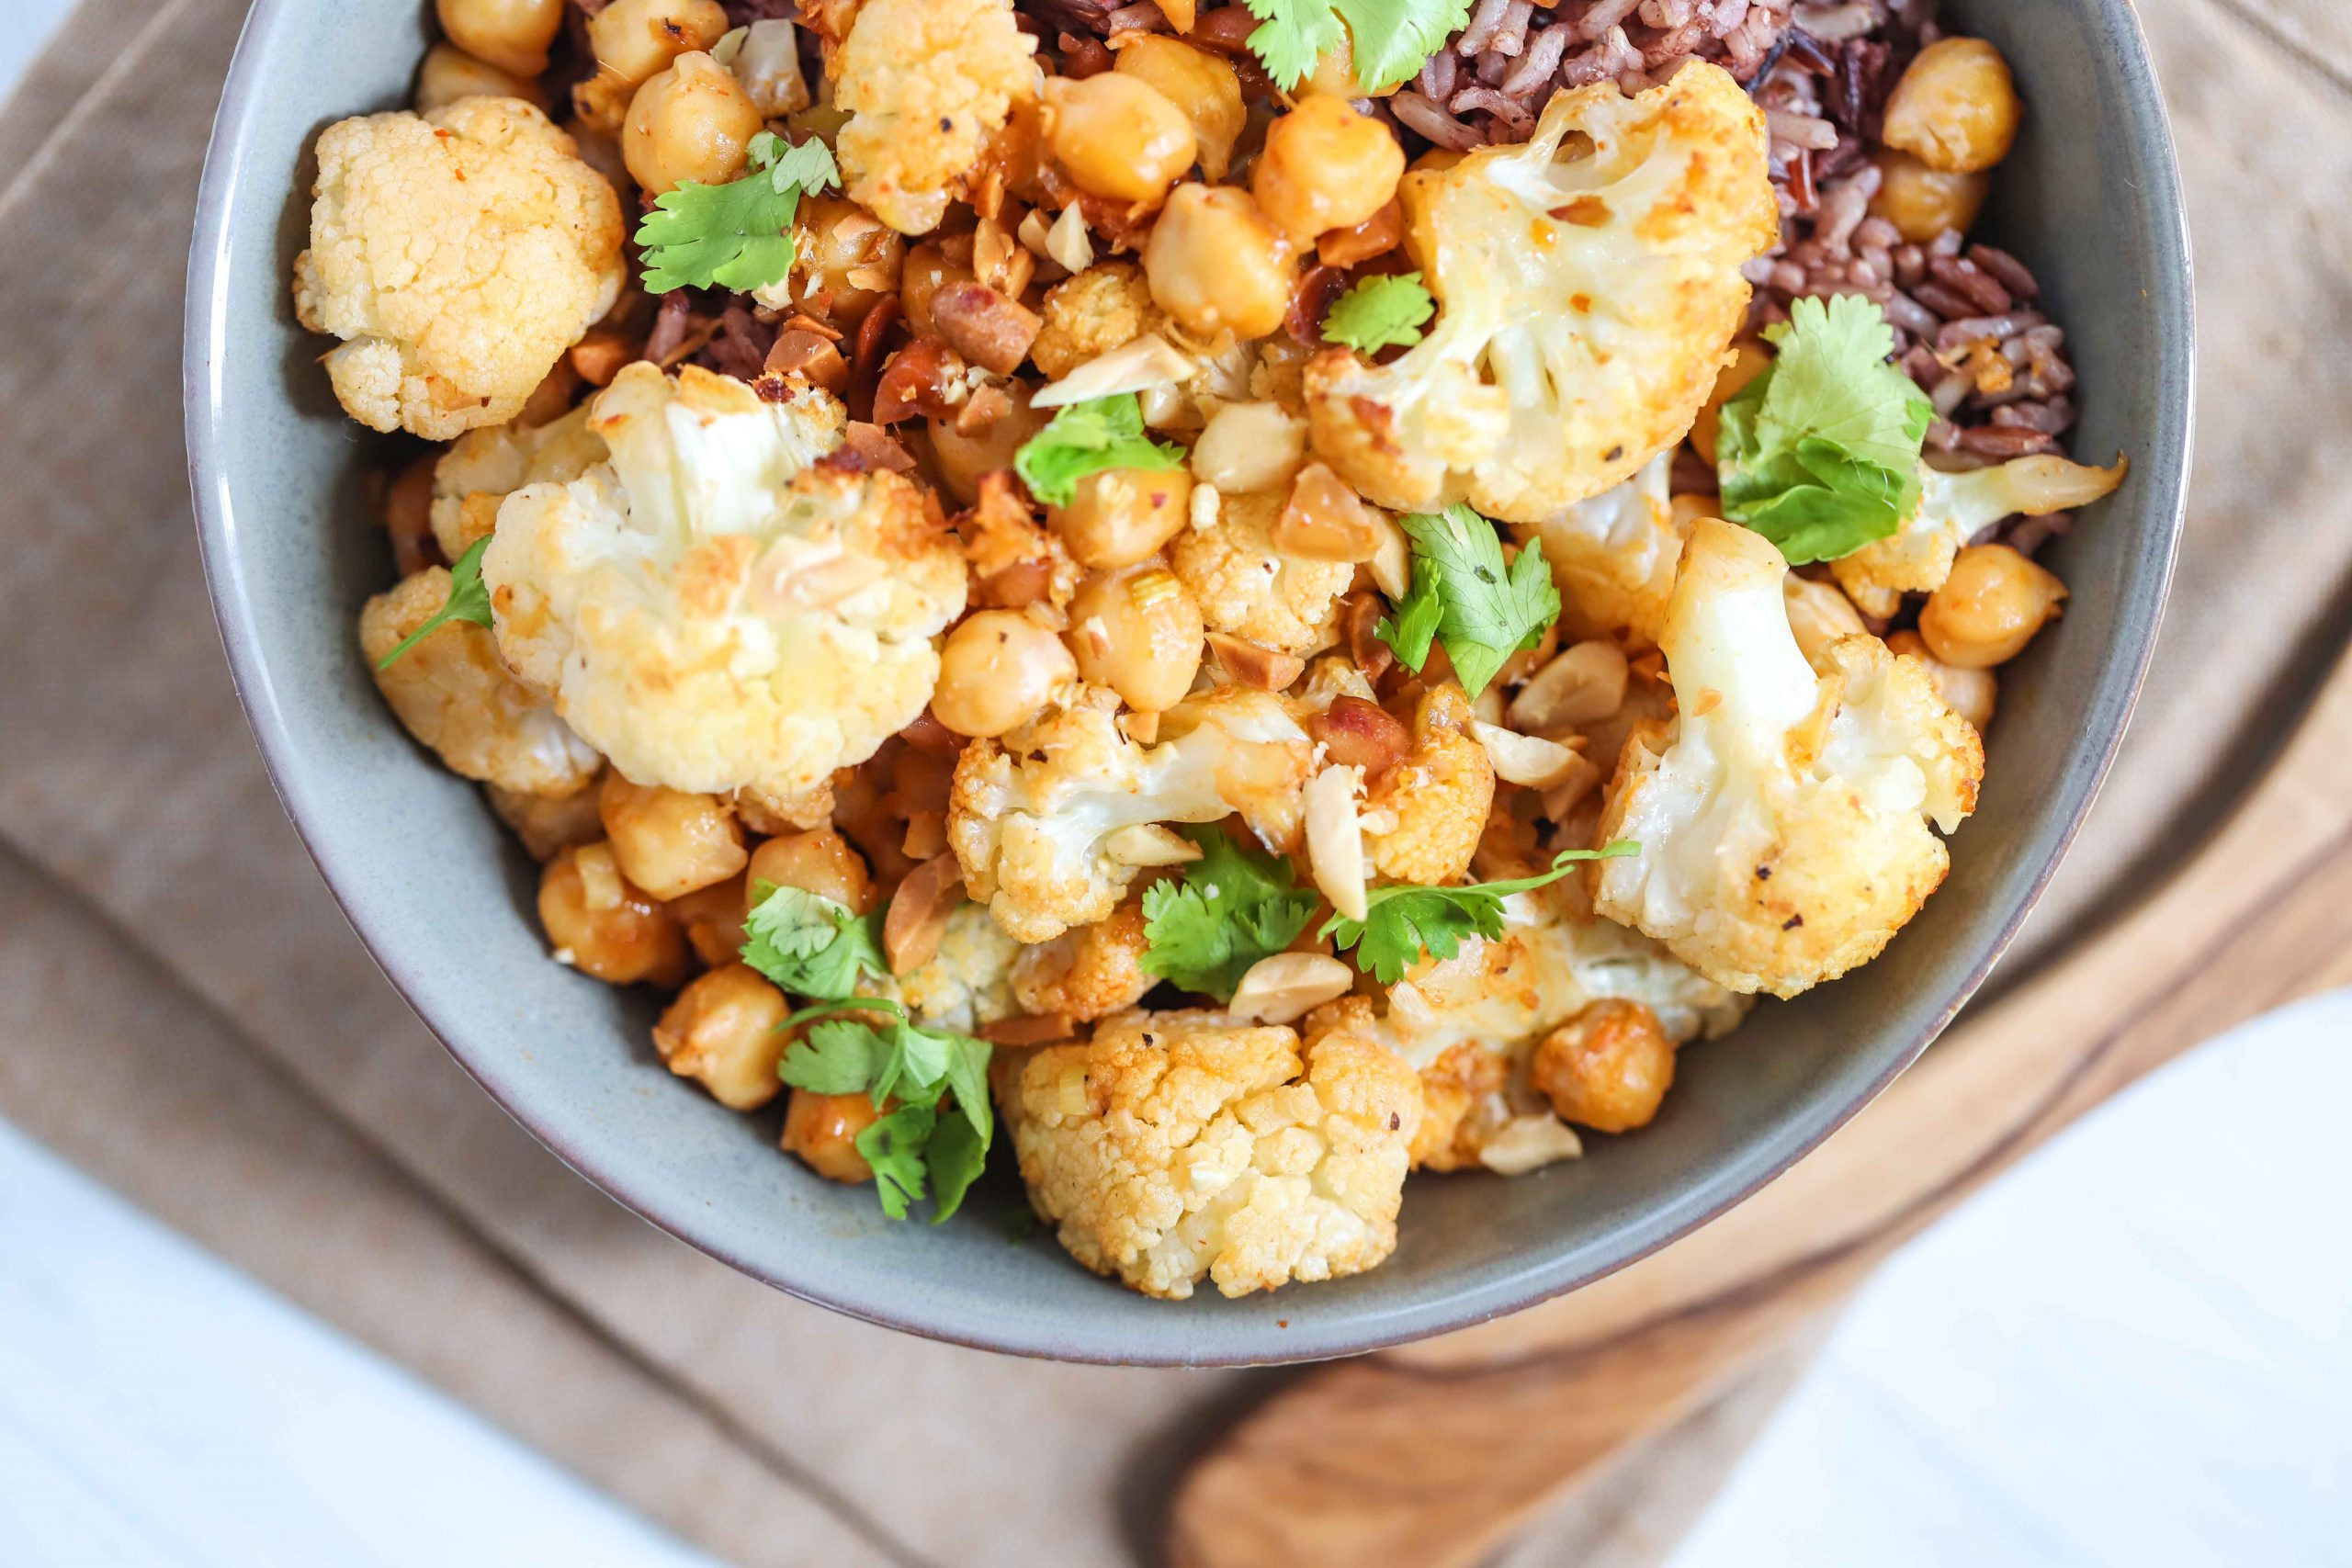 Spicy Cauliflower and Chickpea Rice Bowl - Smiley's Points